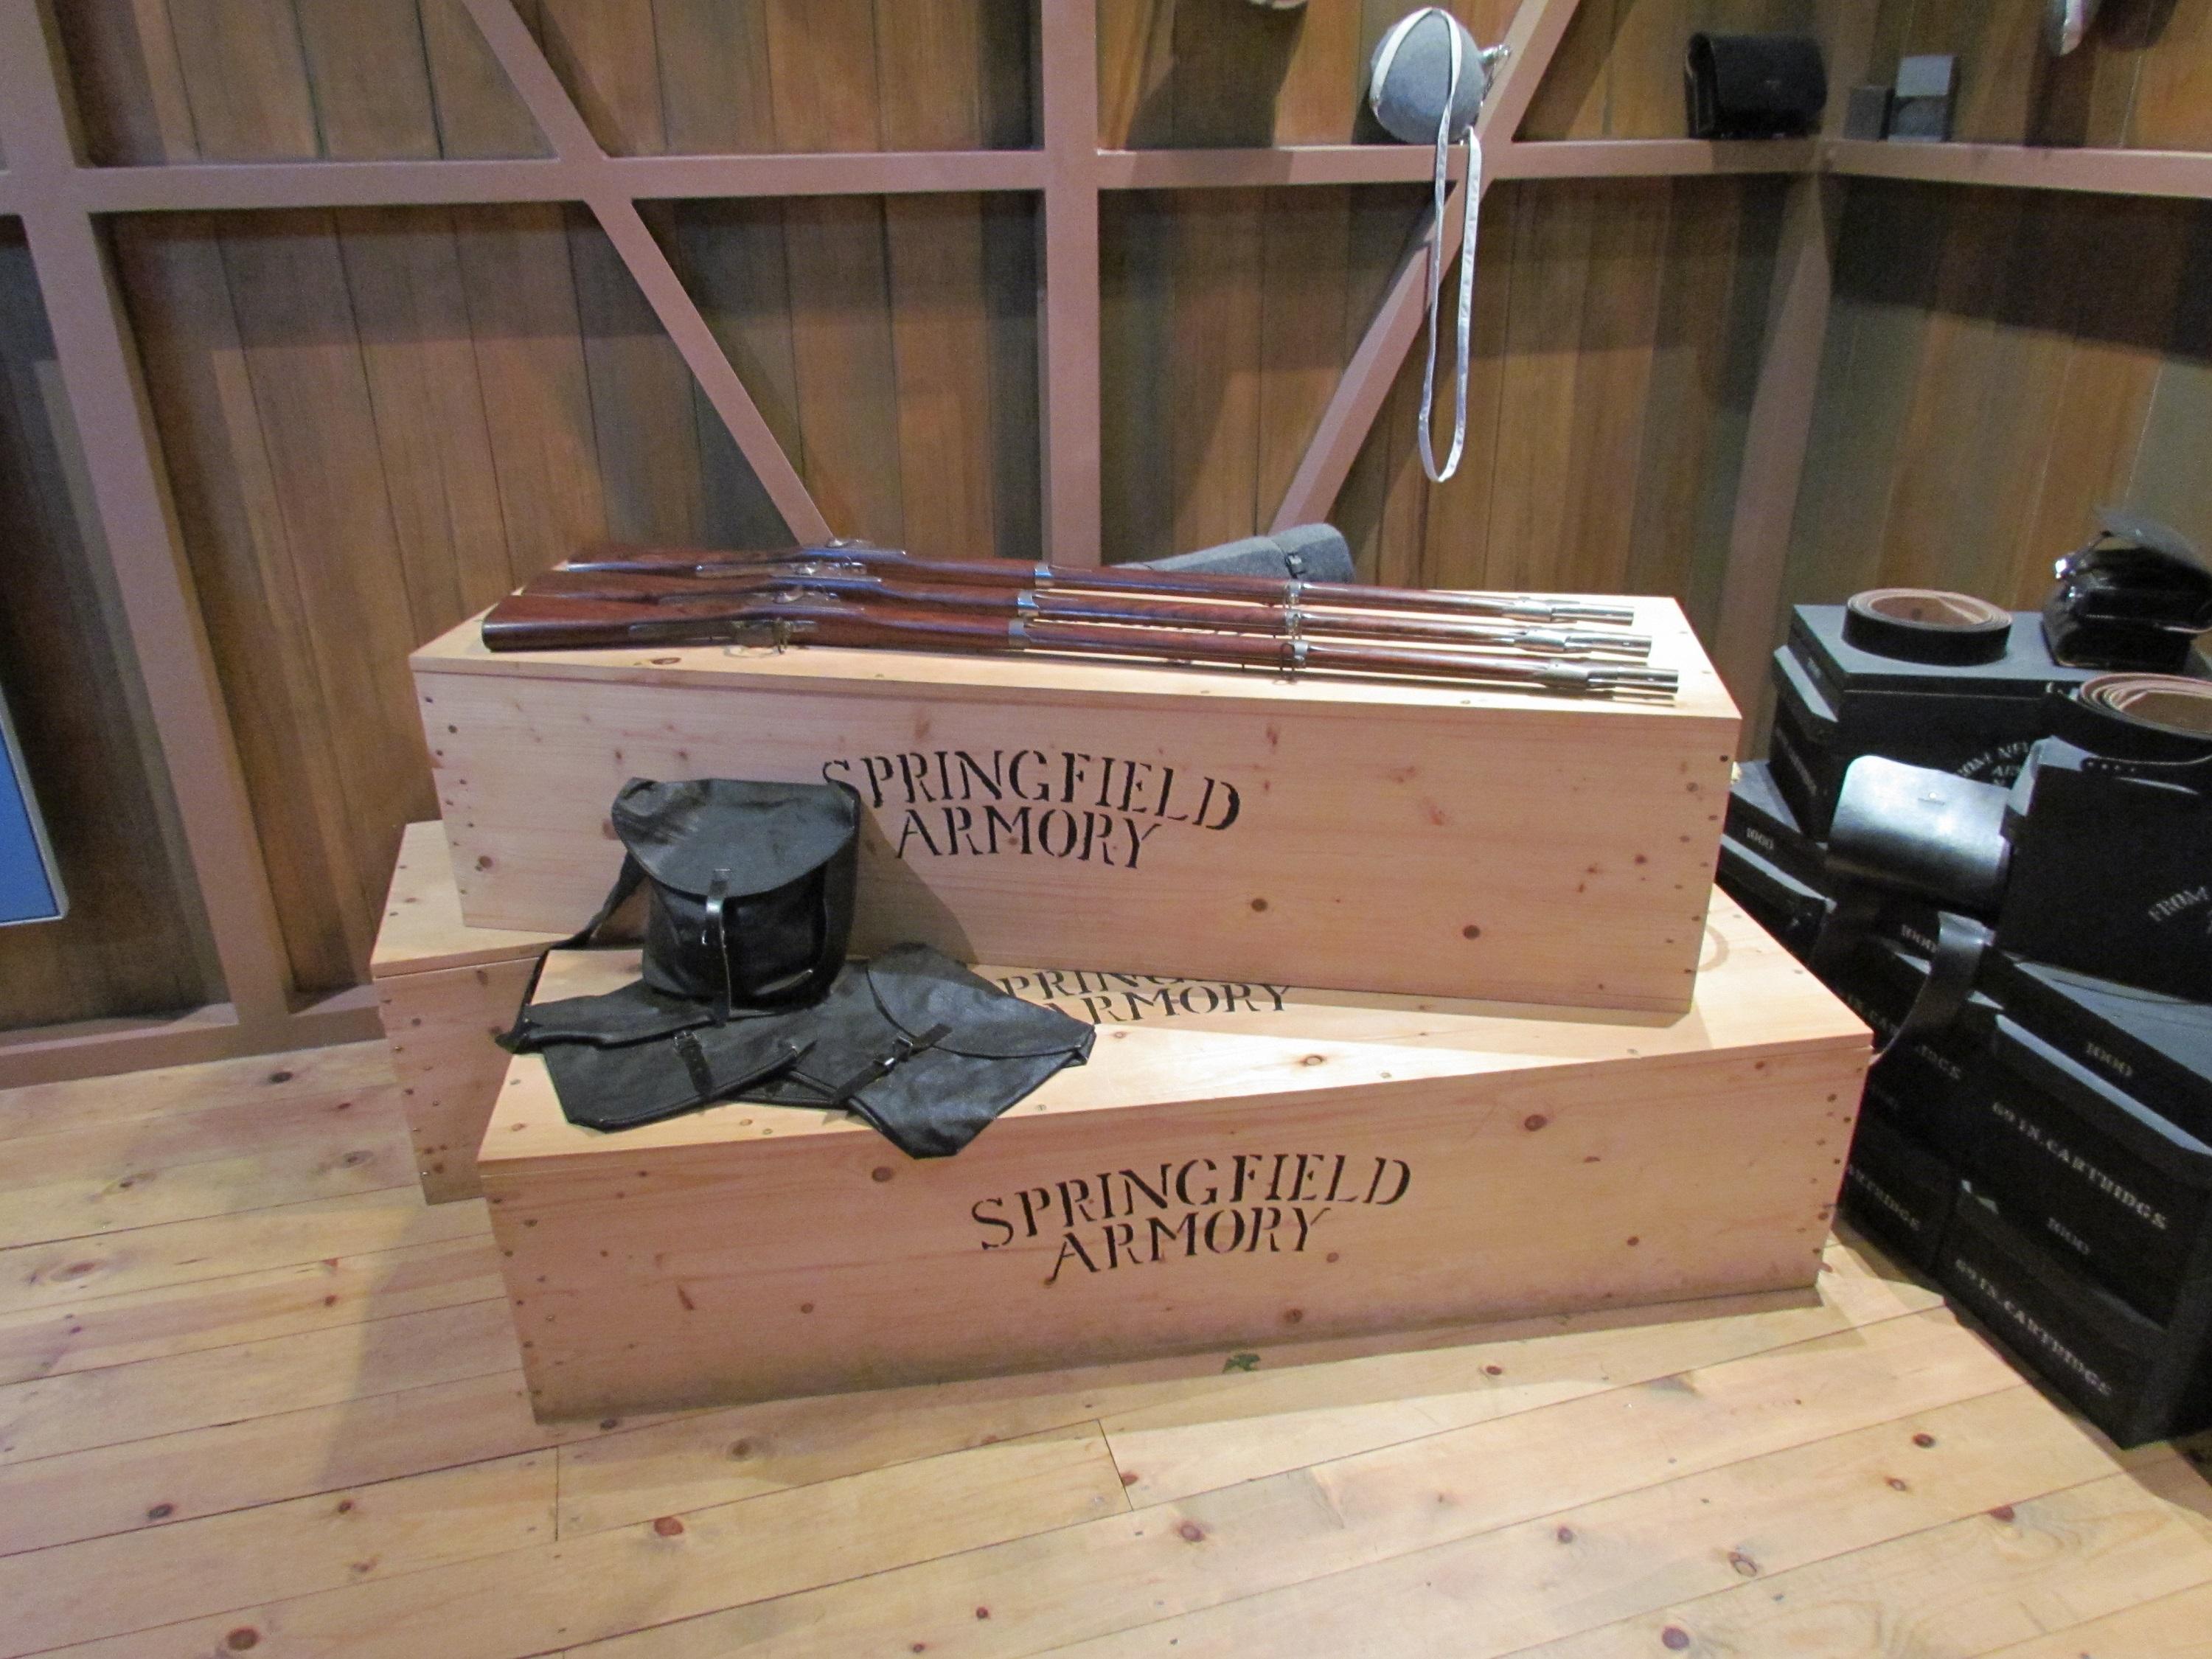 Boxes of muskets as part of a museum display